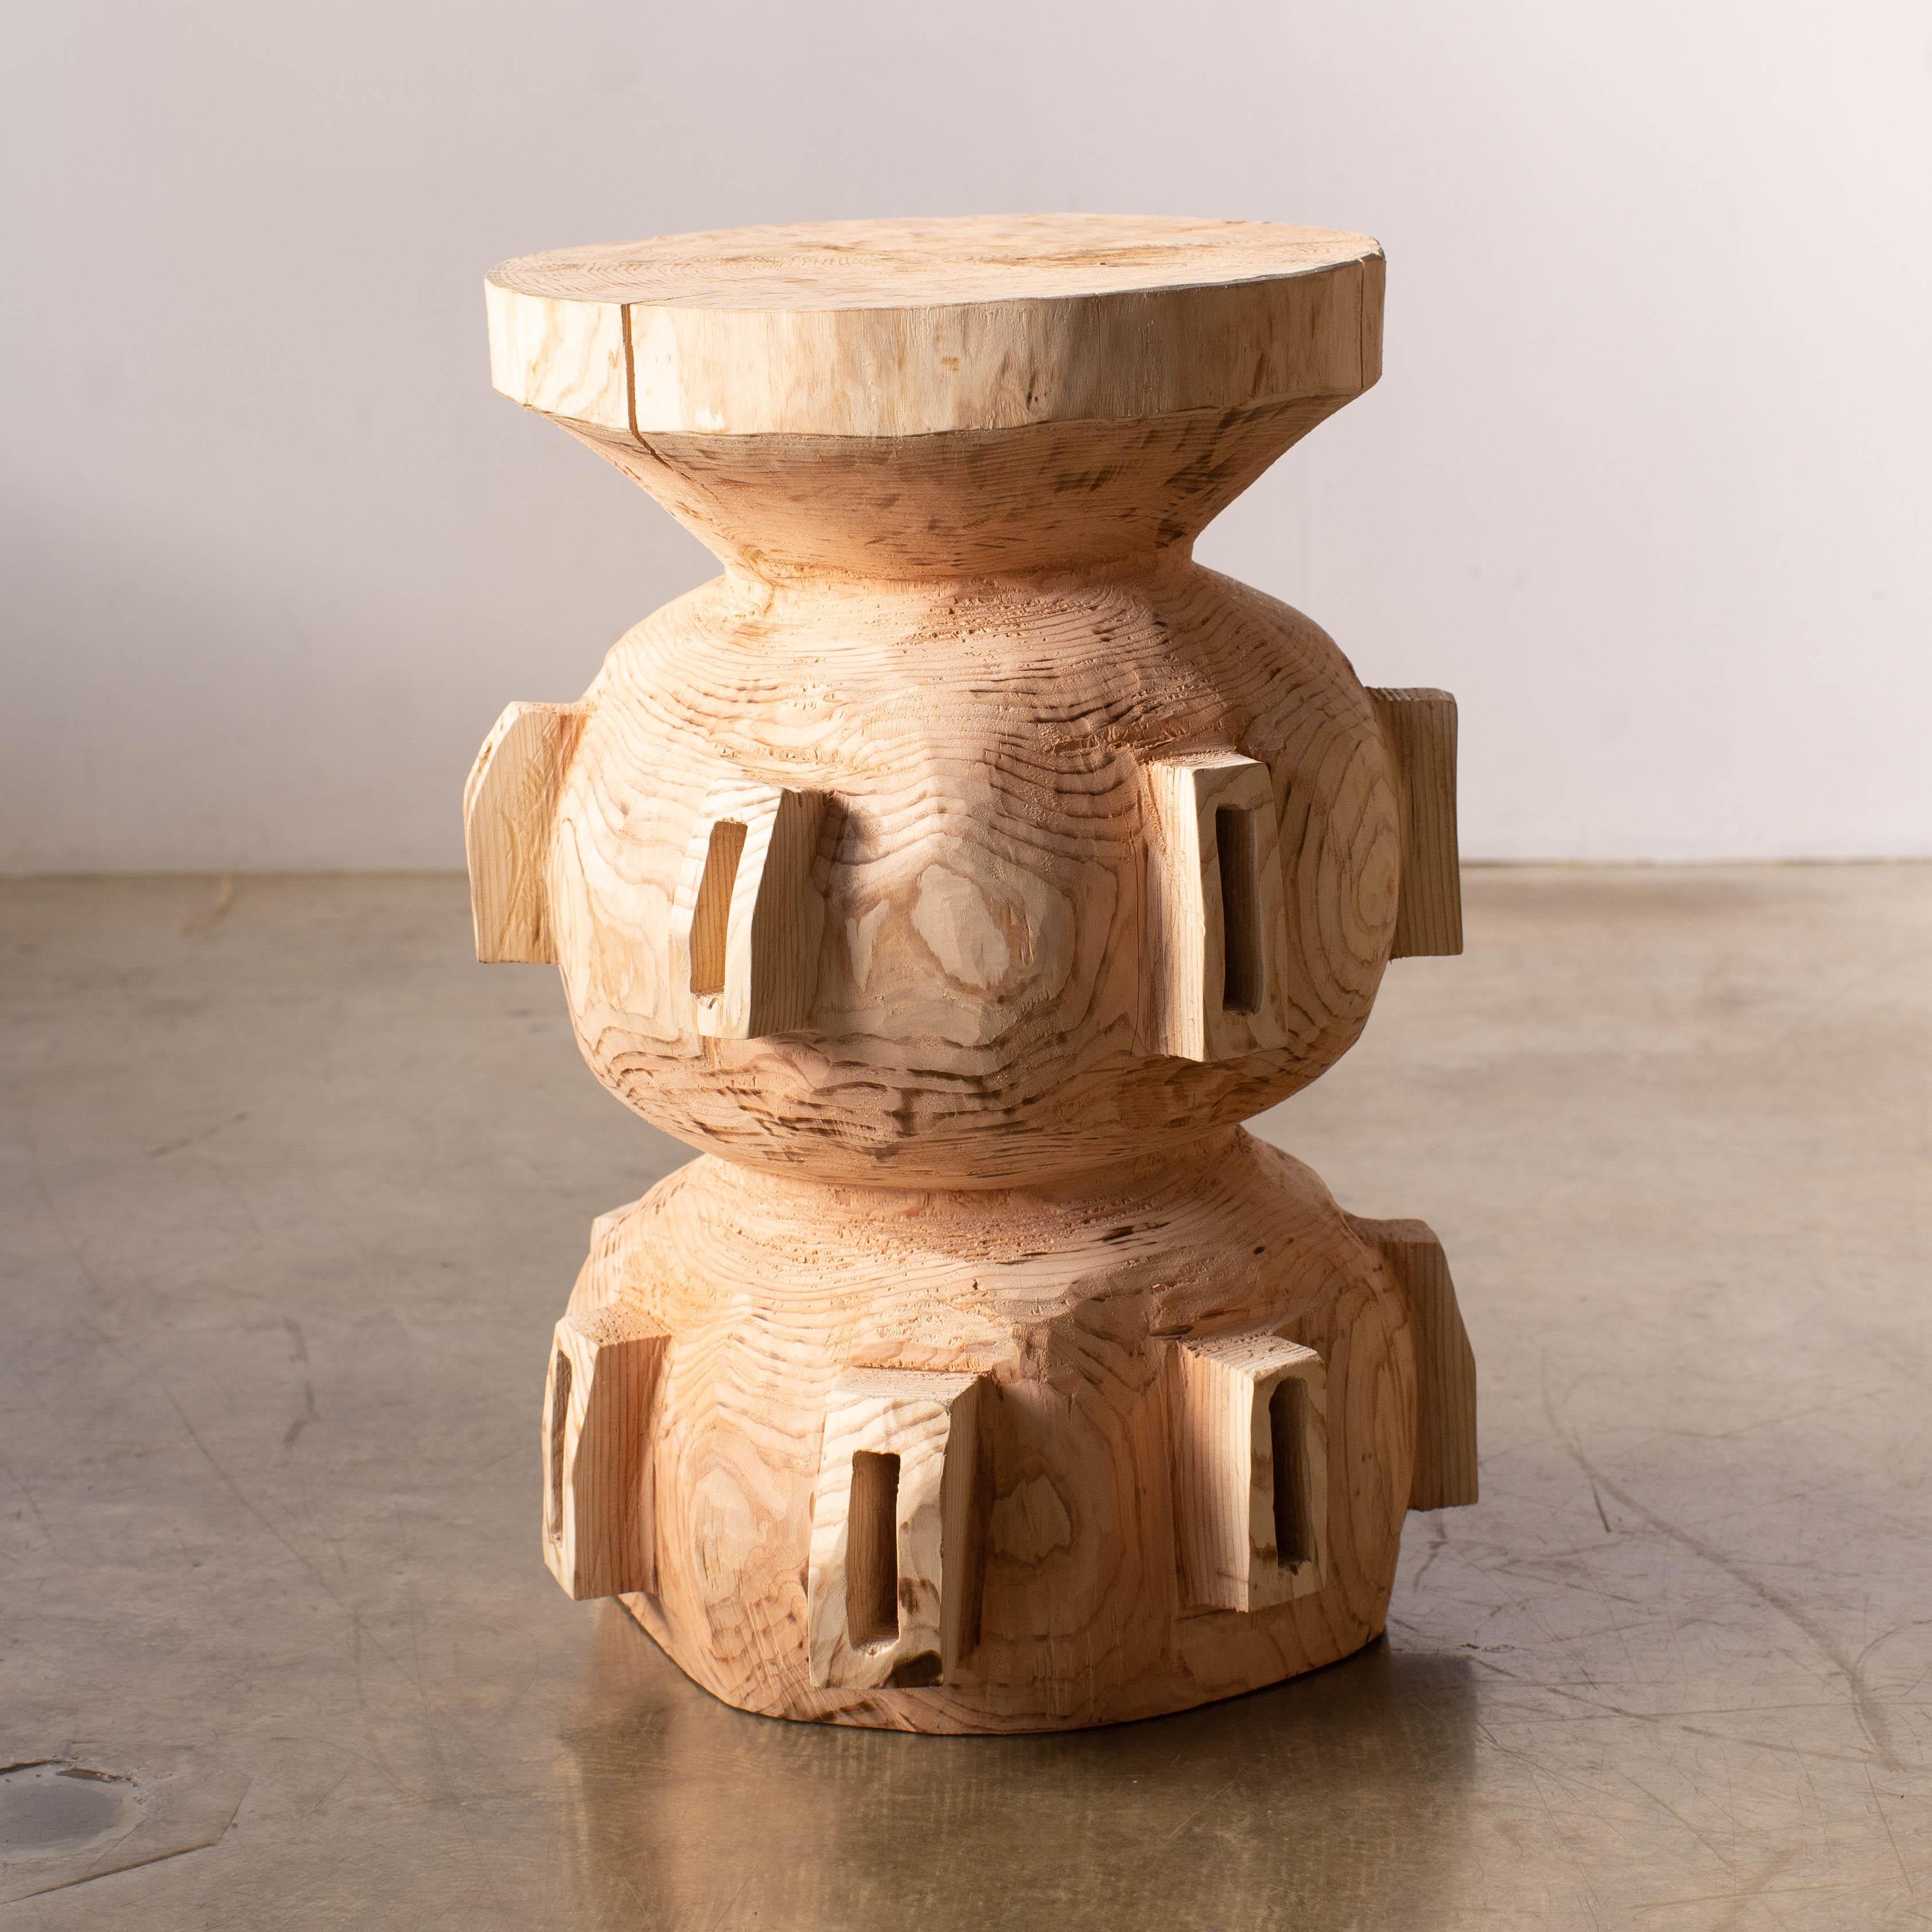 Japanese Hiroyuki Nishimura and Sculptural Stool Side Table 15-2 Tribal Glamping For Sale